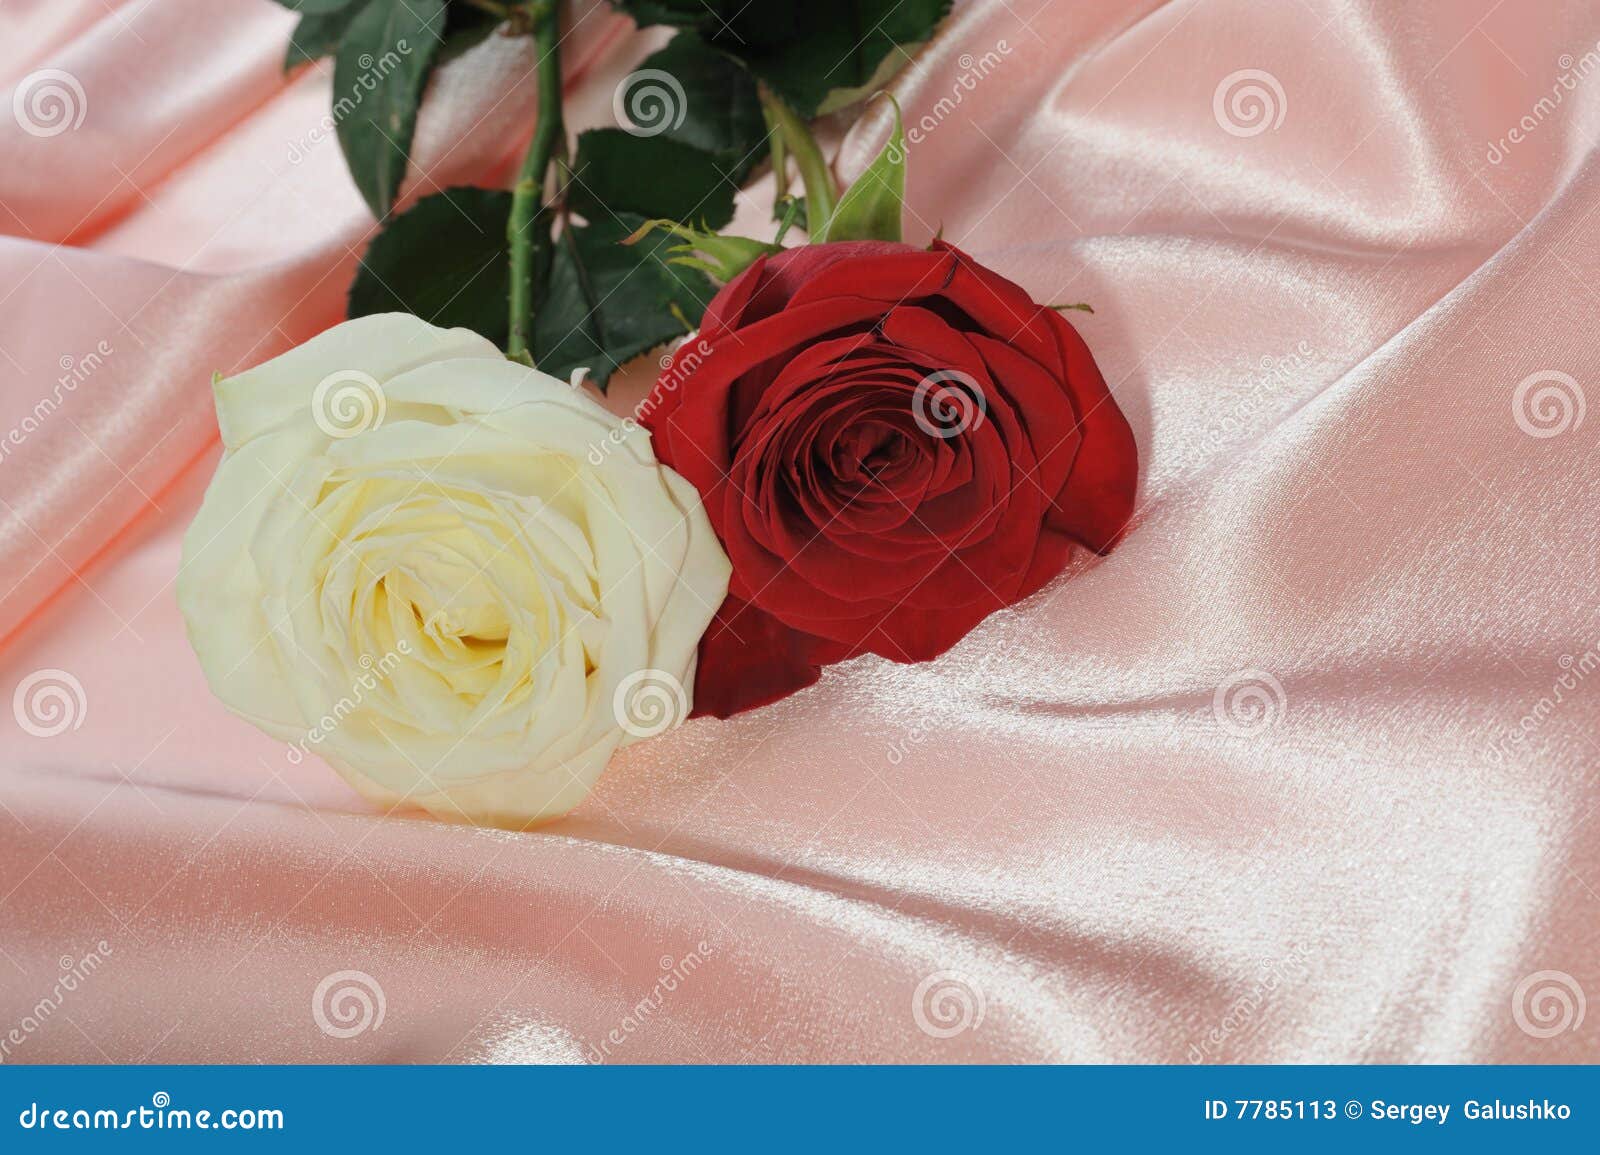 Two rose on cream satin stock image. Image of bedding - 7785113